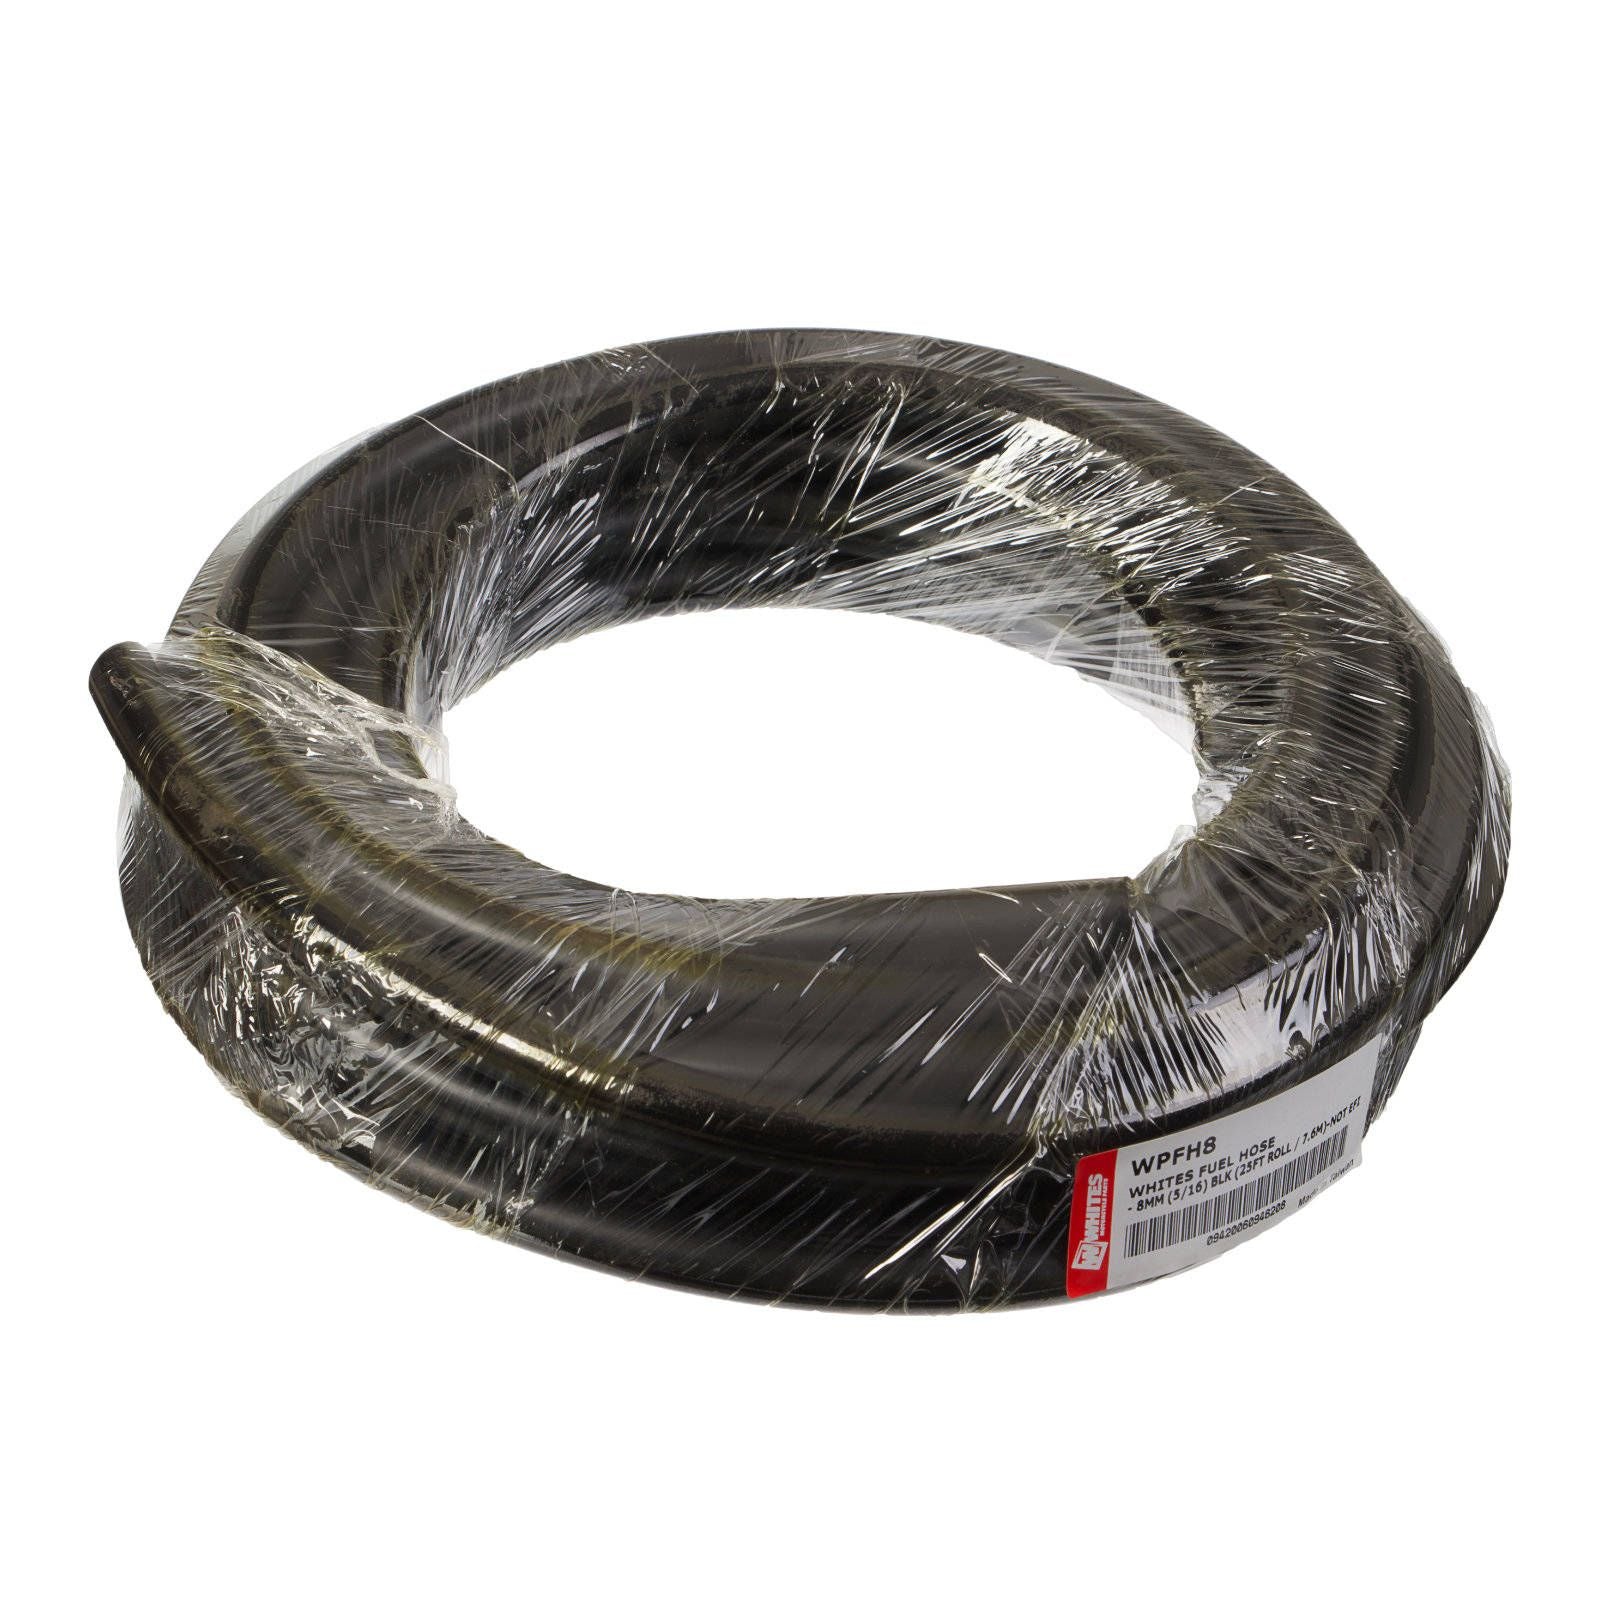 New WHITES Fuel Hose - 8mm (5/16) Blk (25Ft Roll / 7.6M)-Not Efi #WPFH8